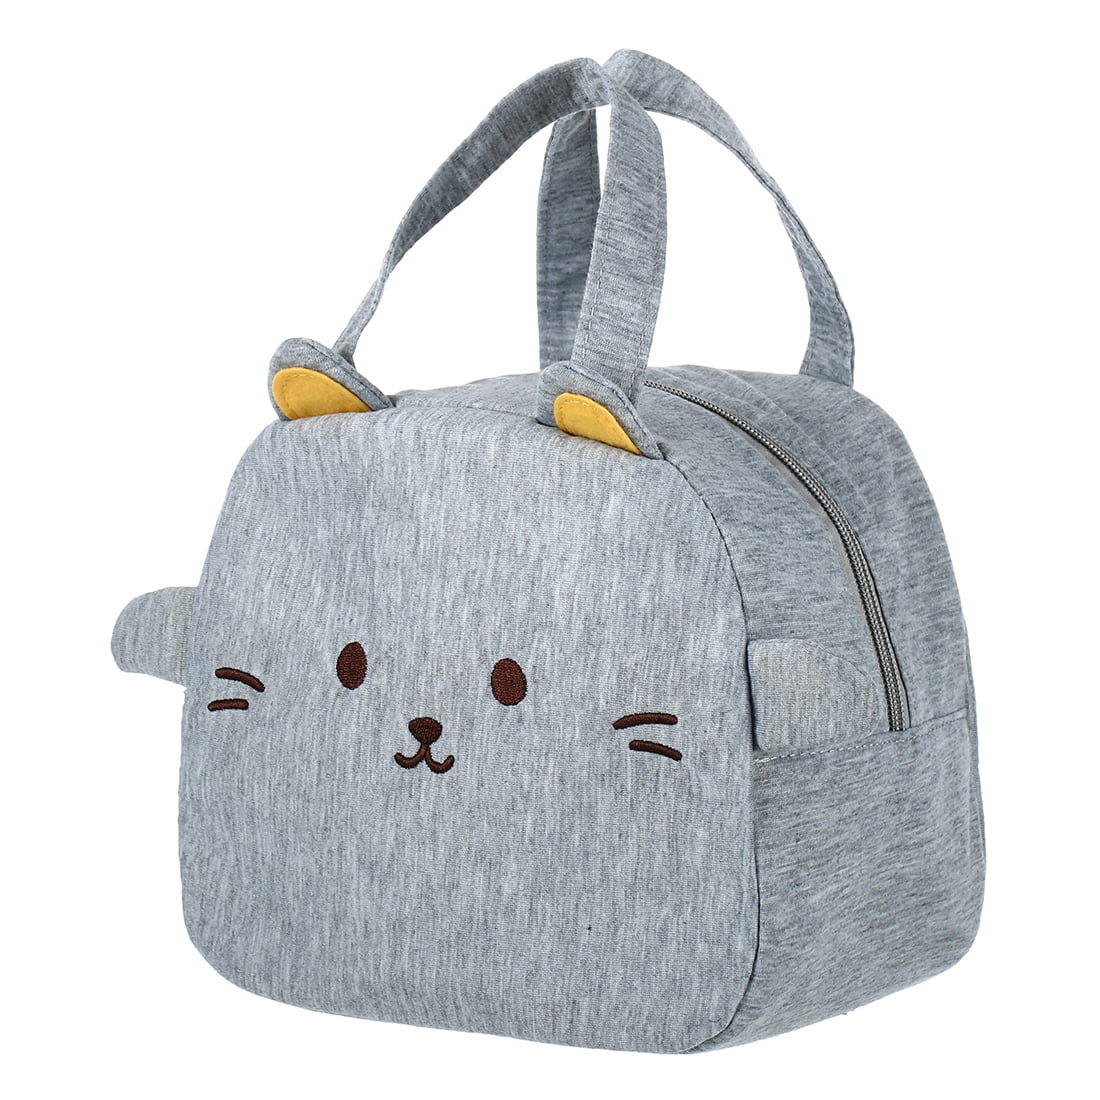 MINISO Insulated Lunch Bag Box Cooler Tote Bento Bags Cute Handbag Meal  Container for Boy Girls School Picnic or Travel - Doggy